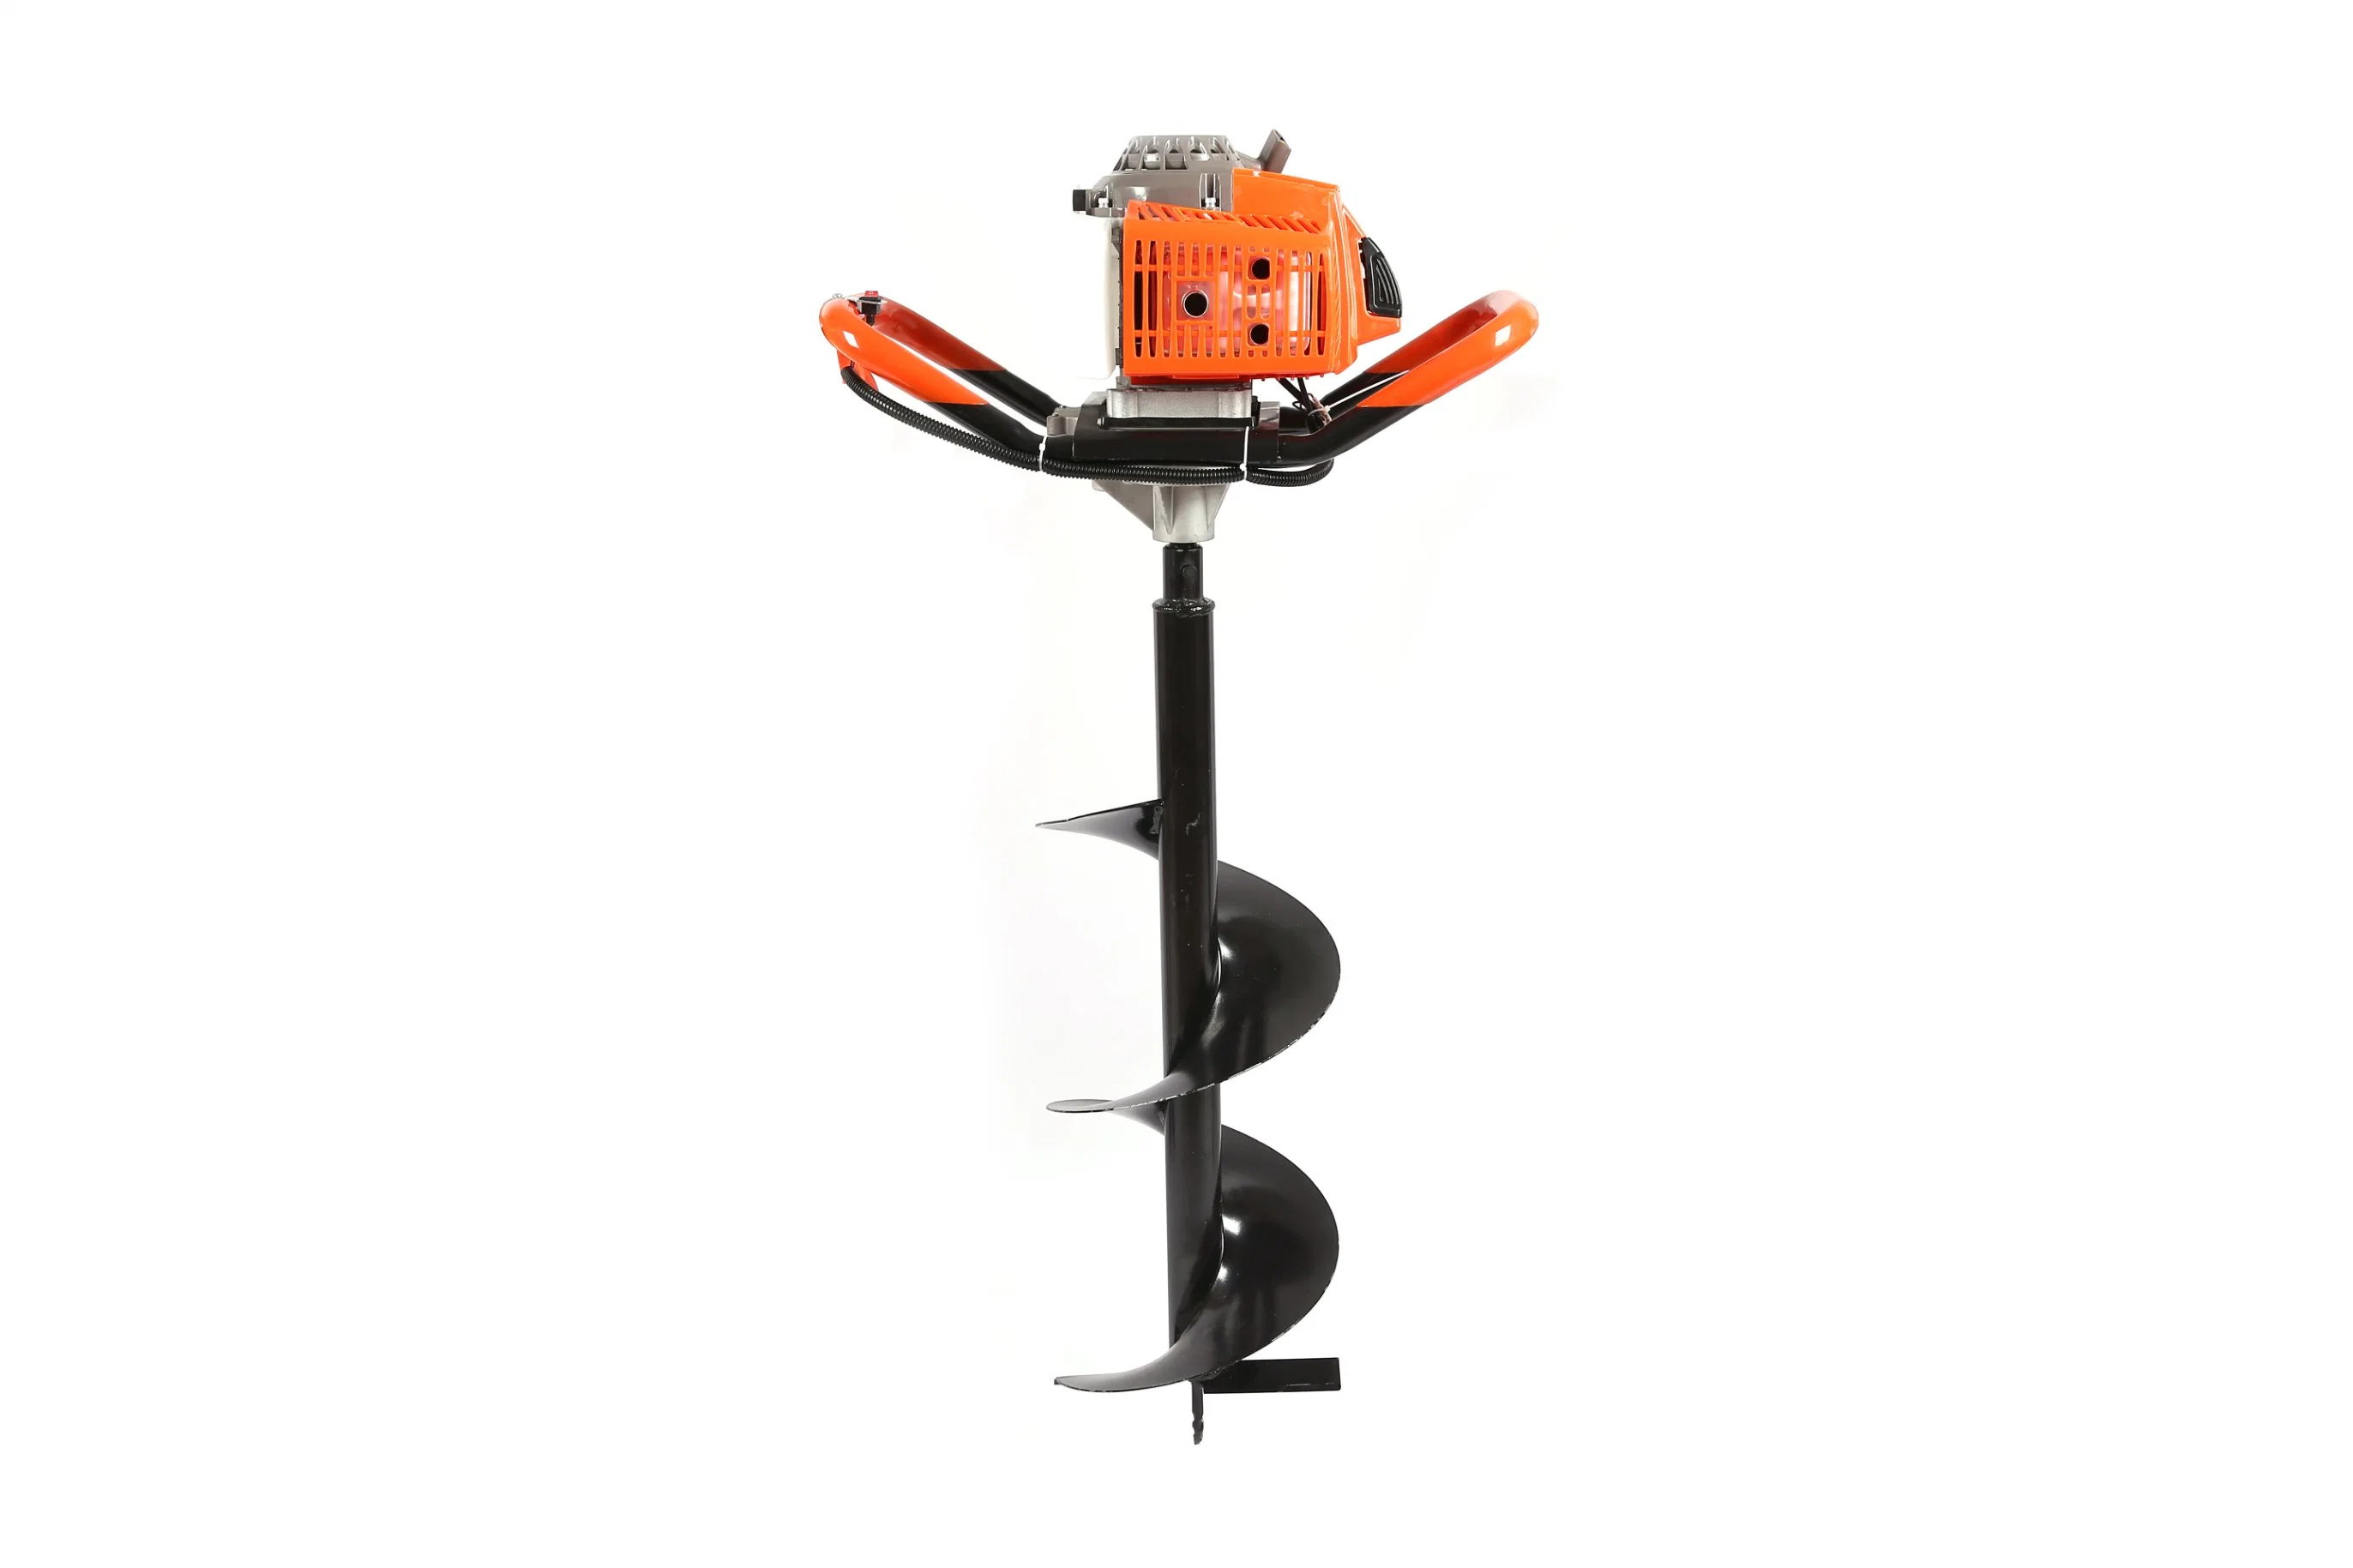 Um 2 Stroke Post Hole Digger Earth Auger 52cc Petrol Gas Powered Earth Auger Post Gasoline Auger